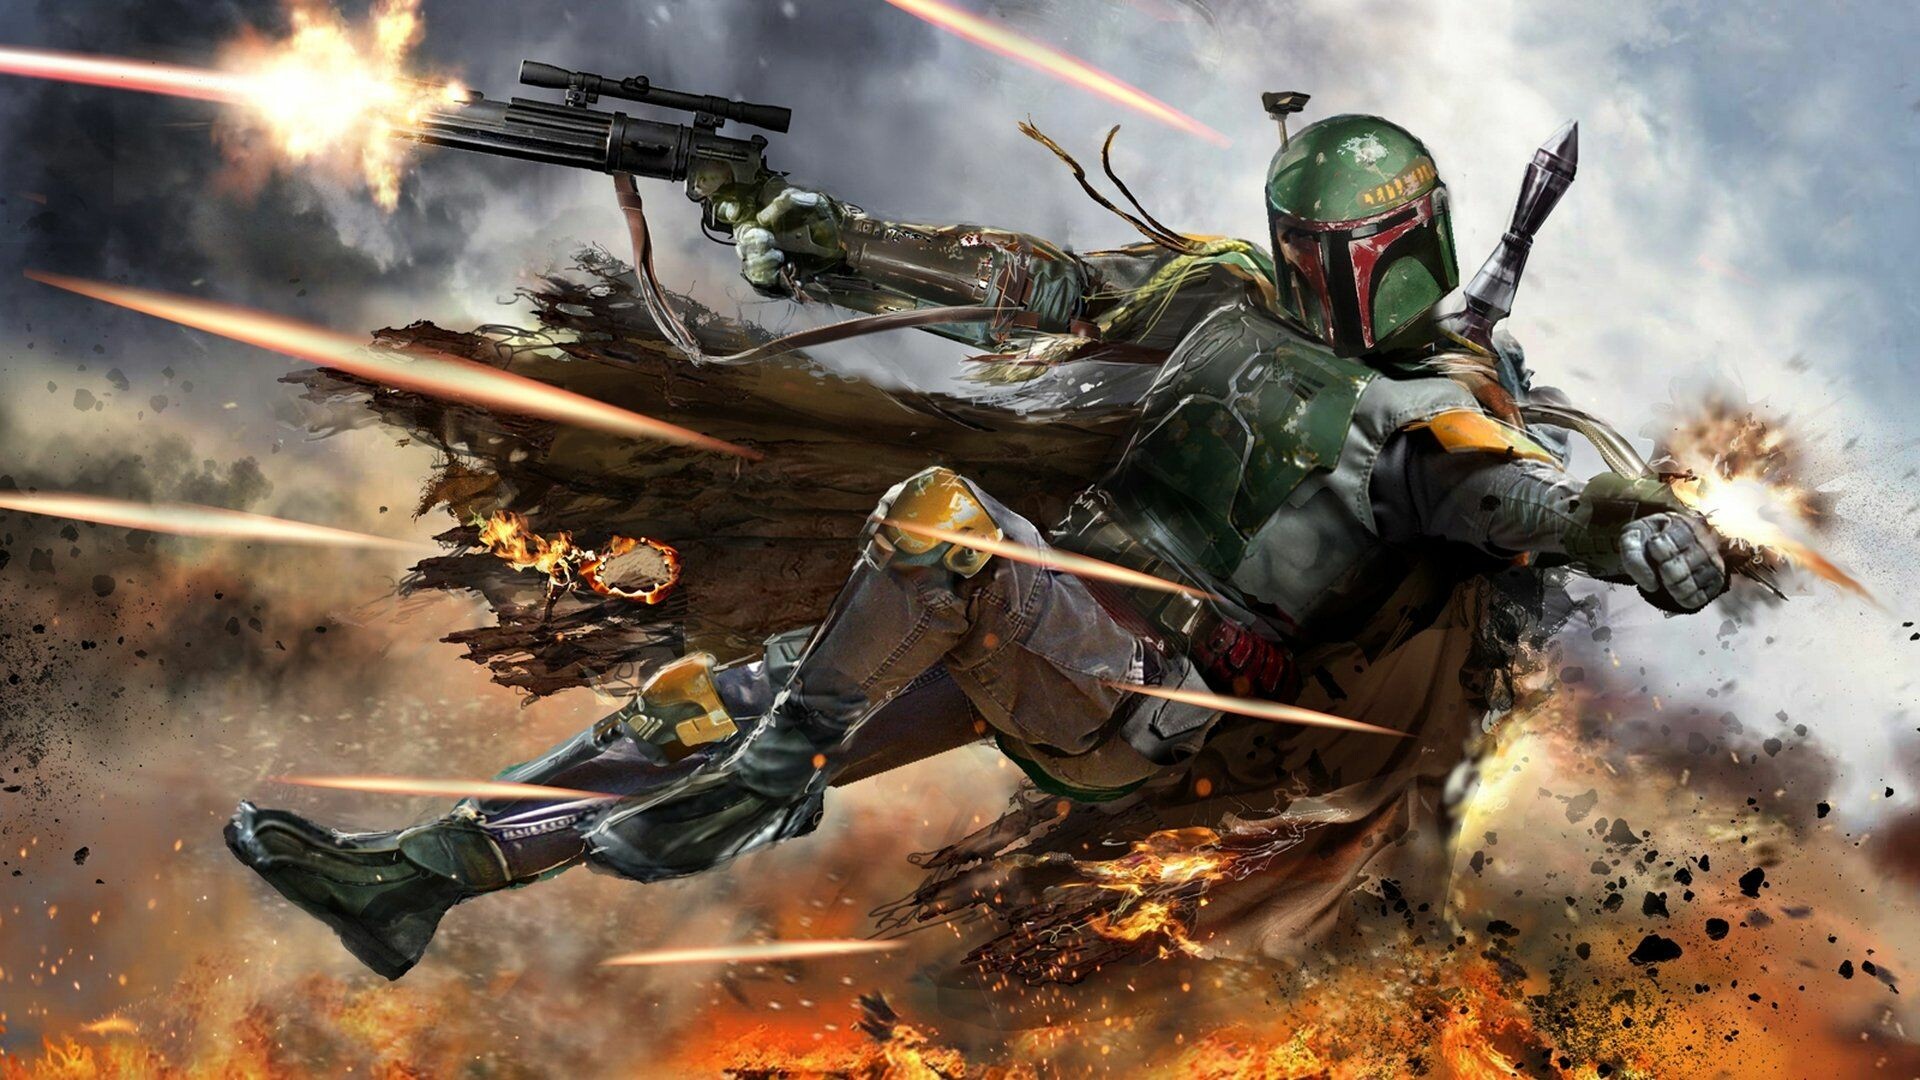 The Book of Boba Fett: The SW character, A fan favorite despite his limited presence in the original Star Wars trilogy. 1920x1080 Full HD Background.